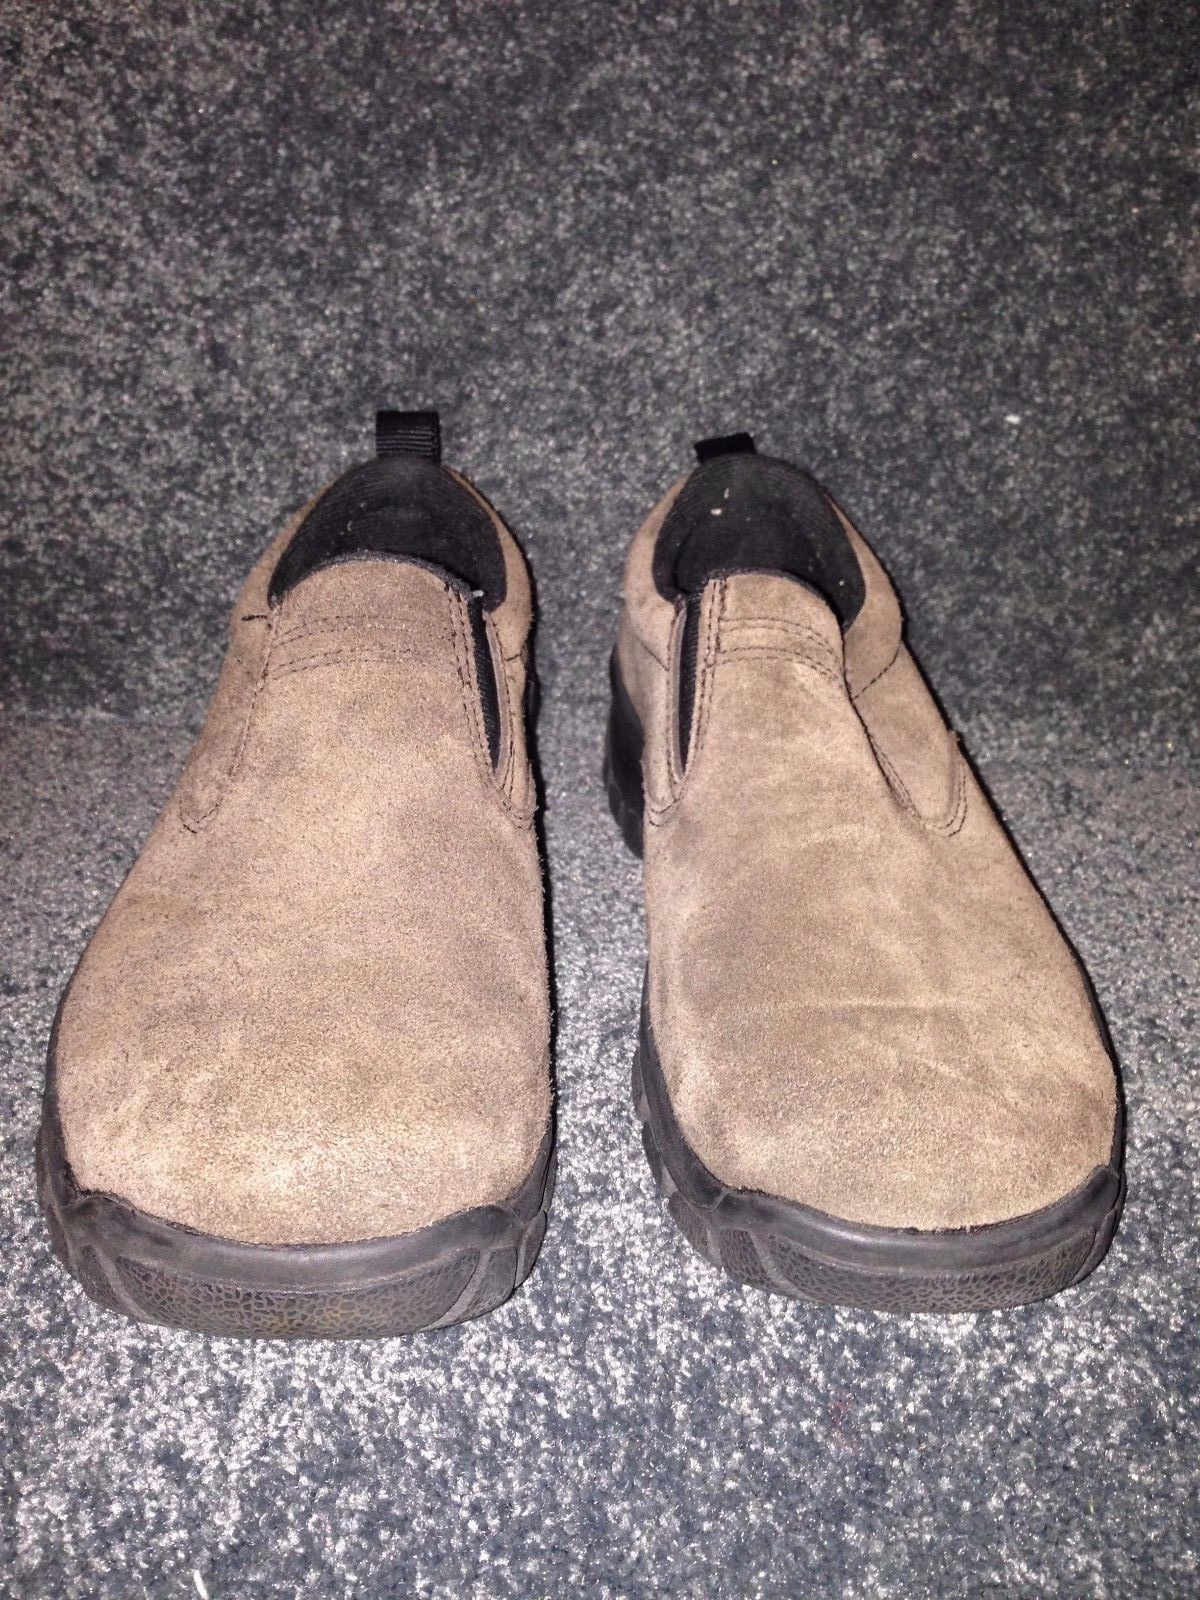 Mens Suede Lands End Shoes SIZE 7M No Slip Soles Well Made Comfortable ...